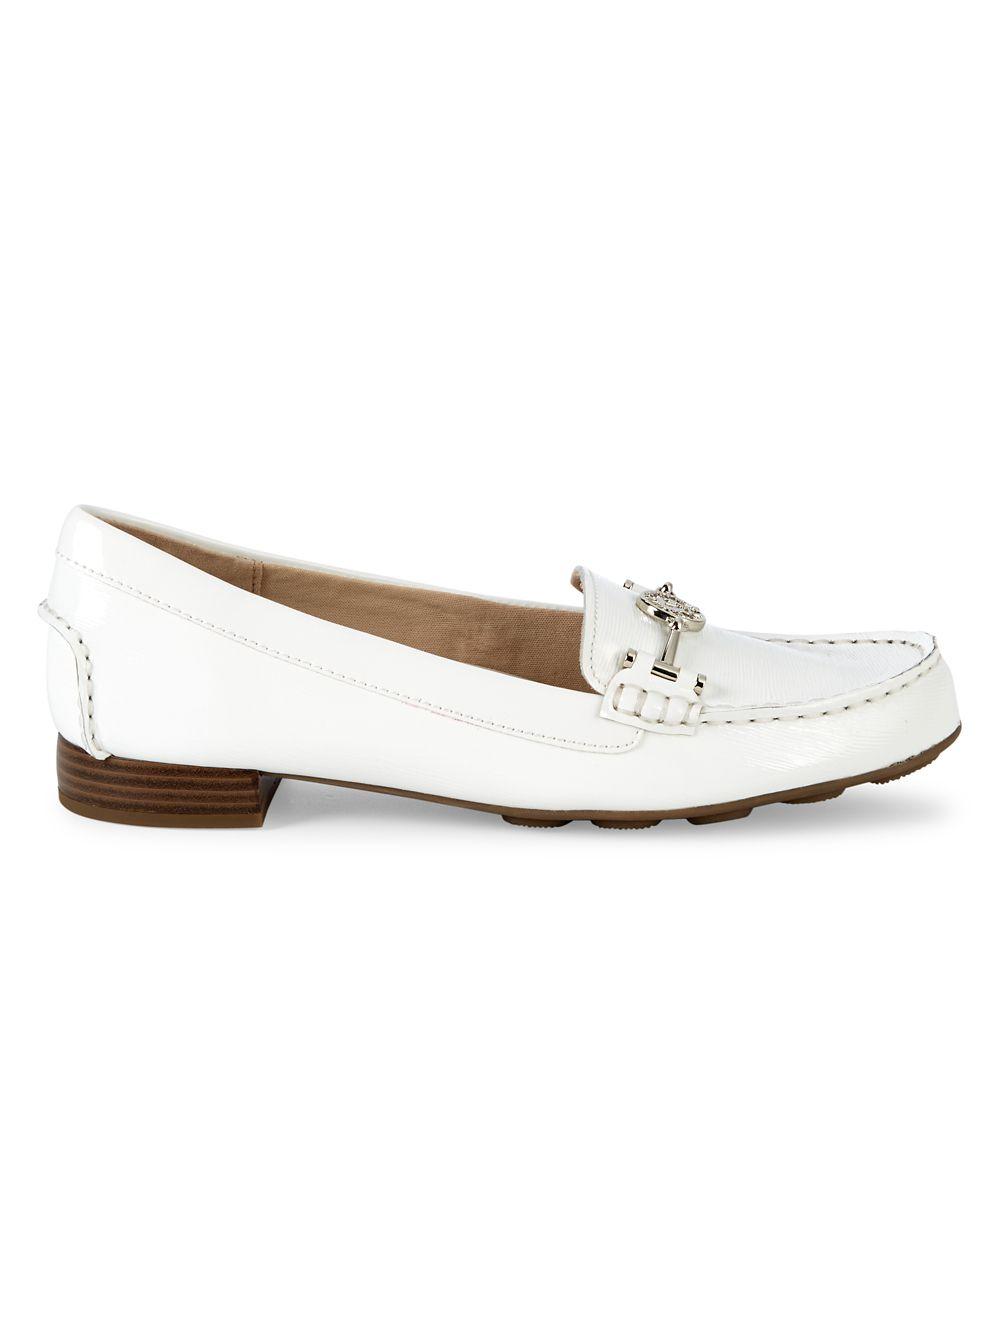 Anne Klein Hulia Classic Leather Loafers in White - Lyst